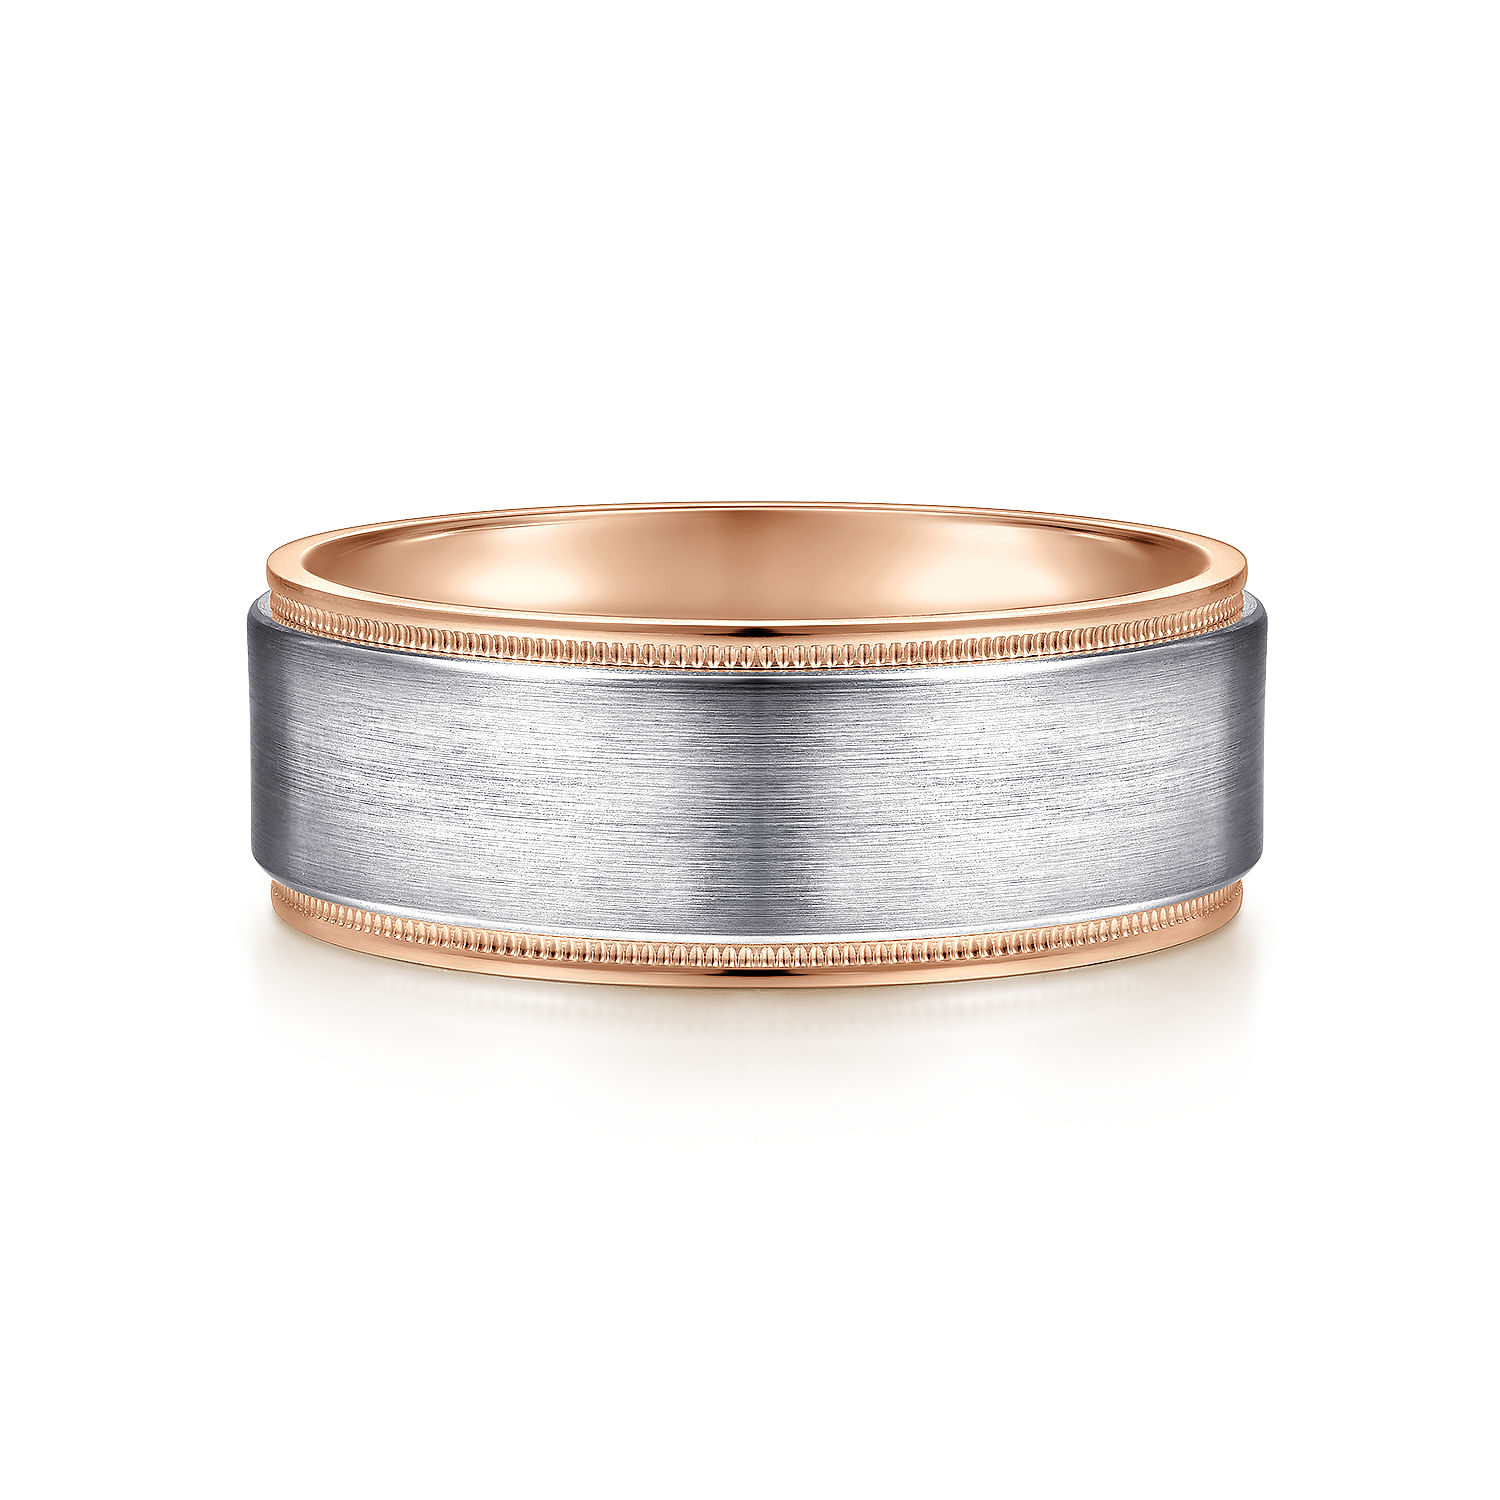 Liam---14K-White-Yellow-Gold-8mm---Two-Tone-Men's-Wedding-Band-in-Satin-Finish1